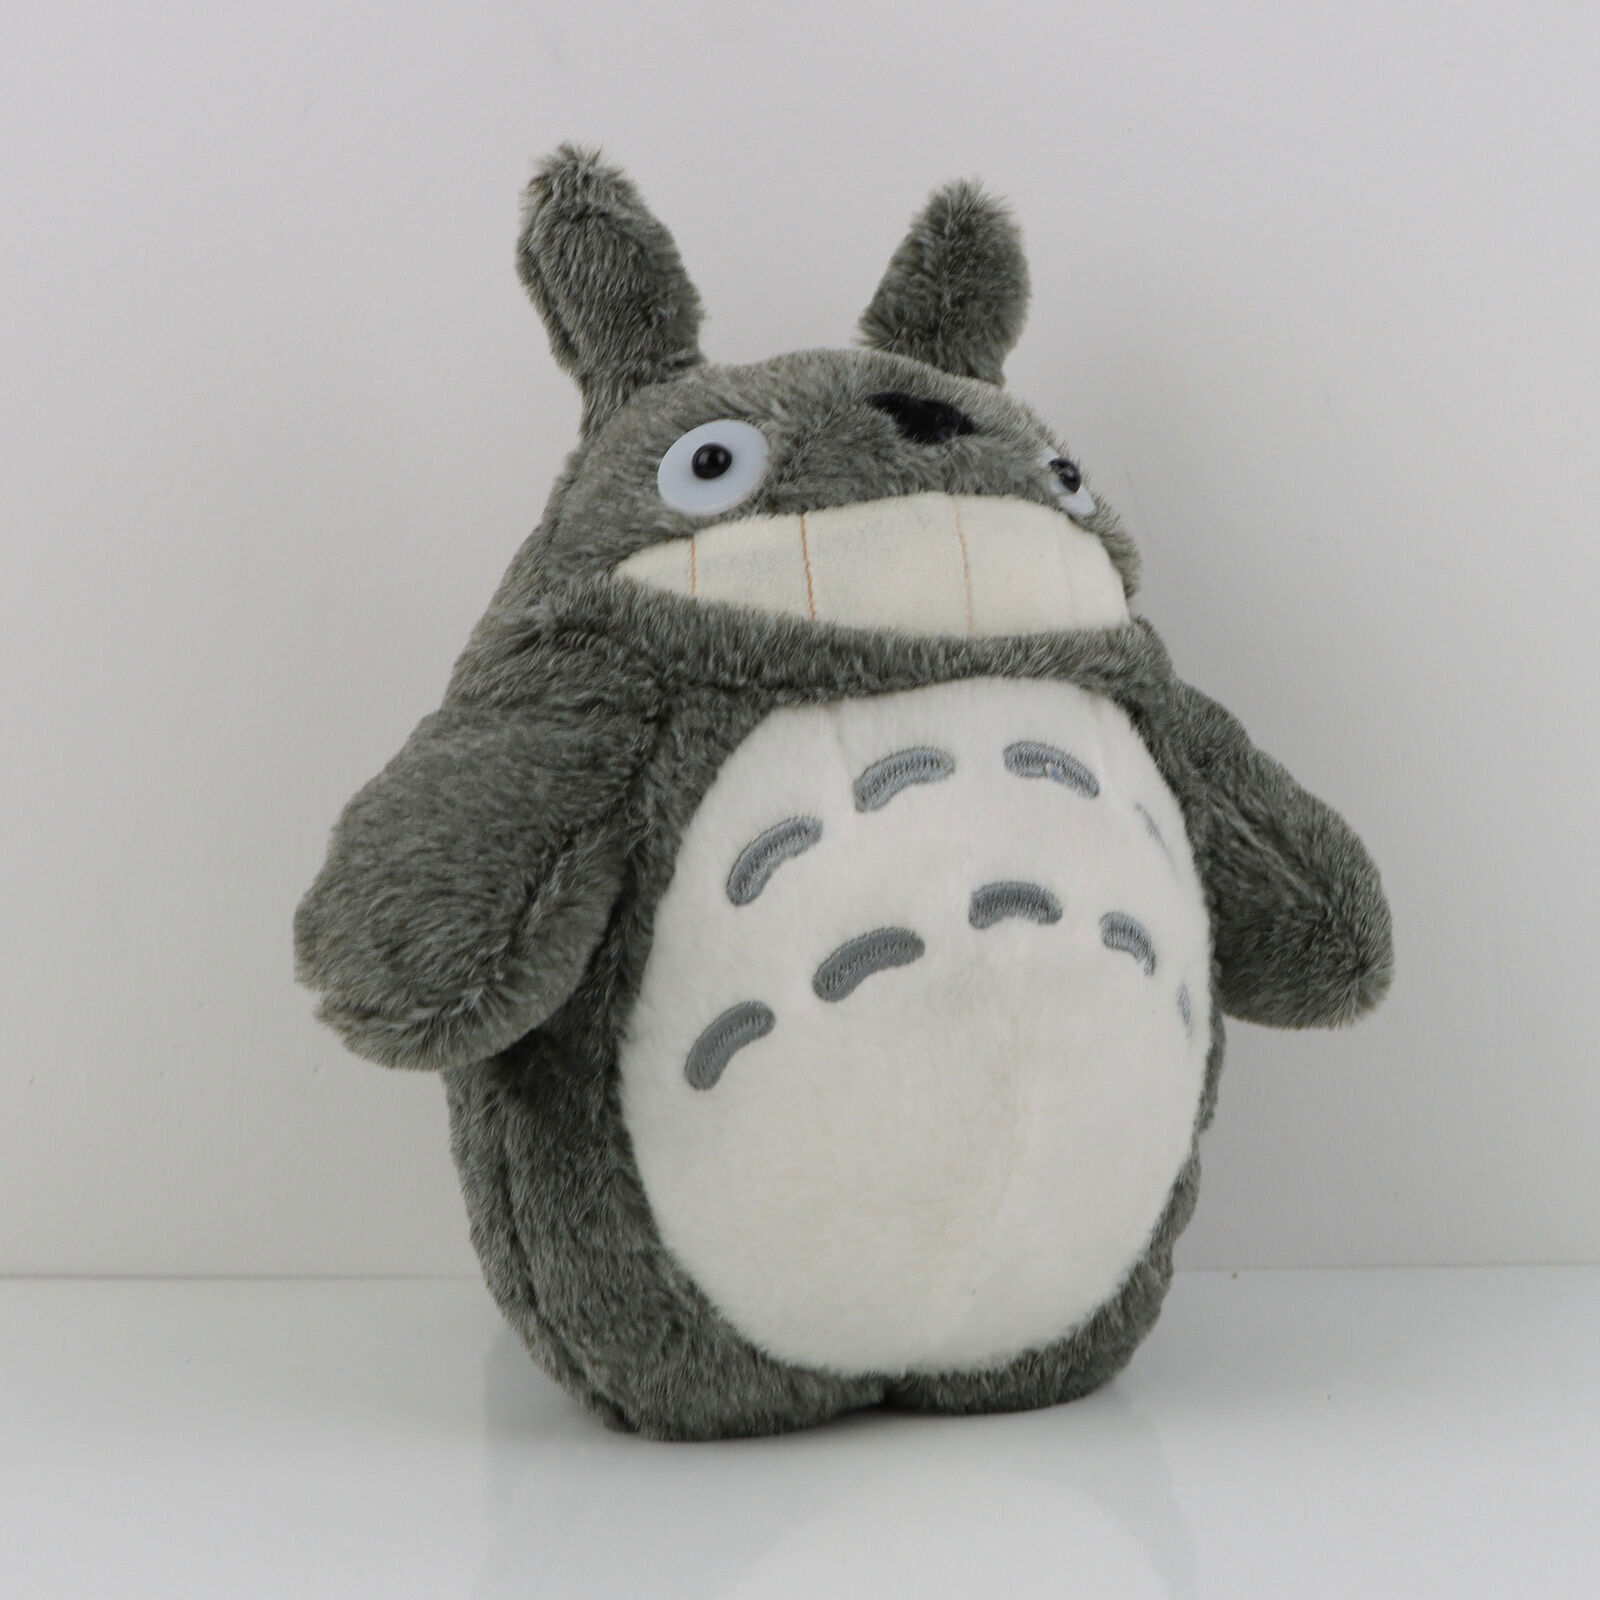 30cm Lovely Totoro Plush Doll Stuffed Anime Collection Doll Kids Birthday Gift#h